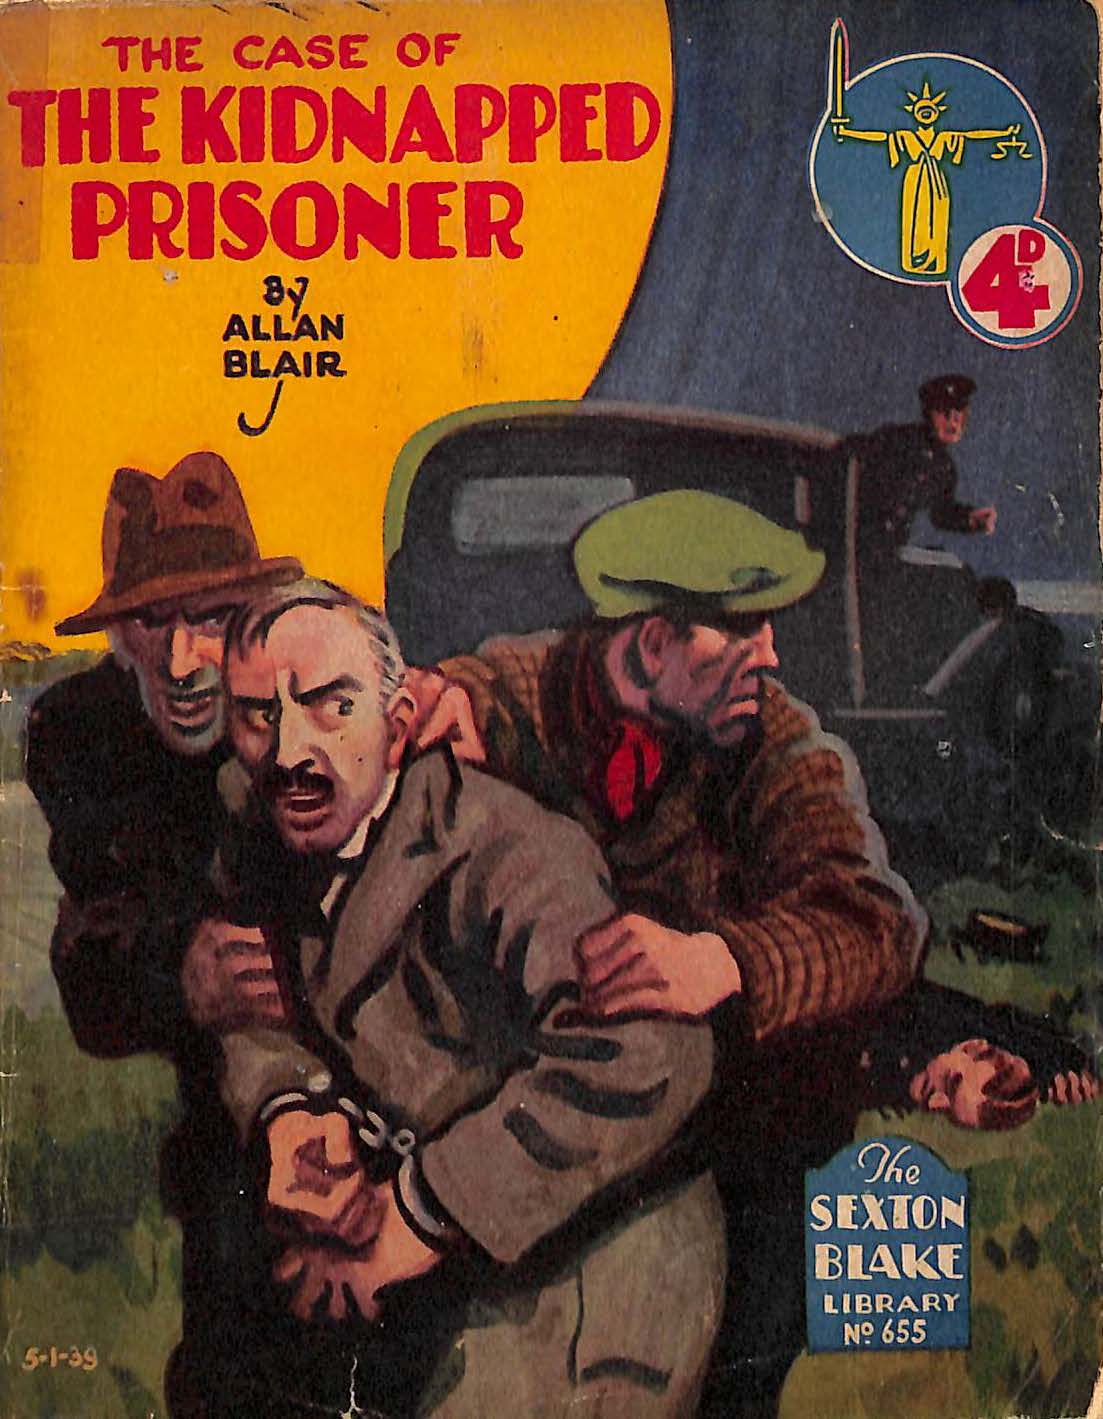 Comic Book Cover For Sexton Blake Library S2 655 - The Case of the Kidnapped Prisoner